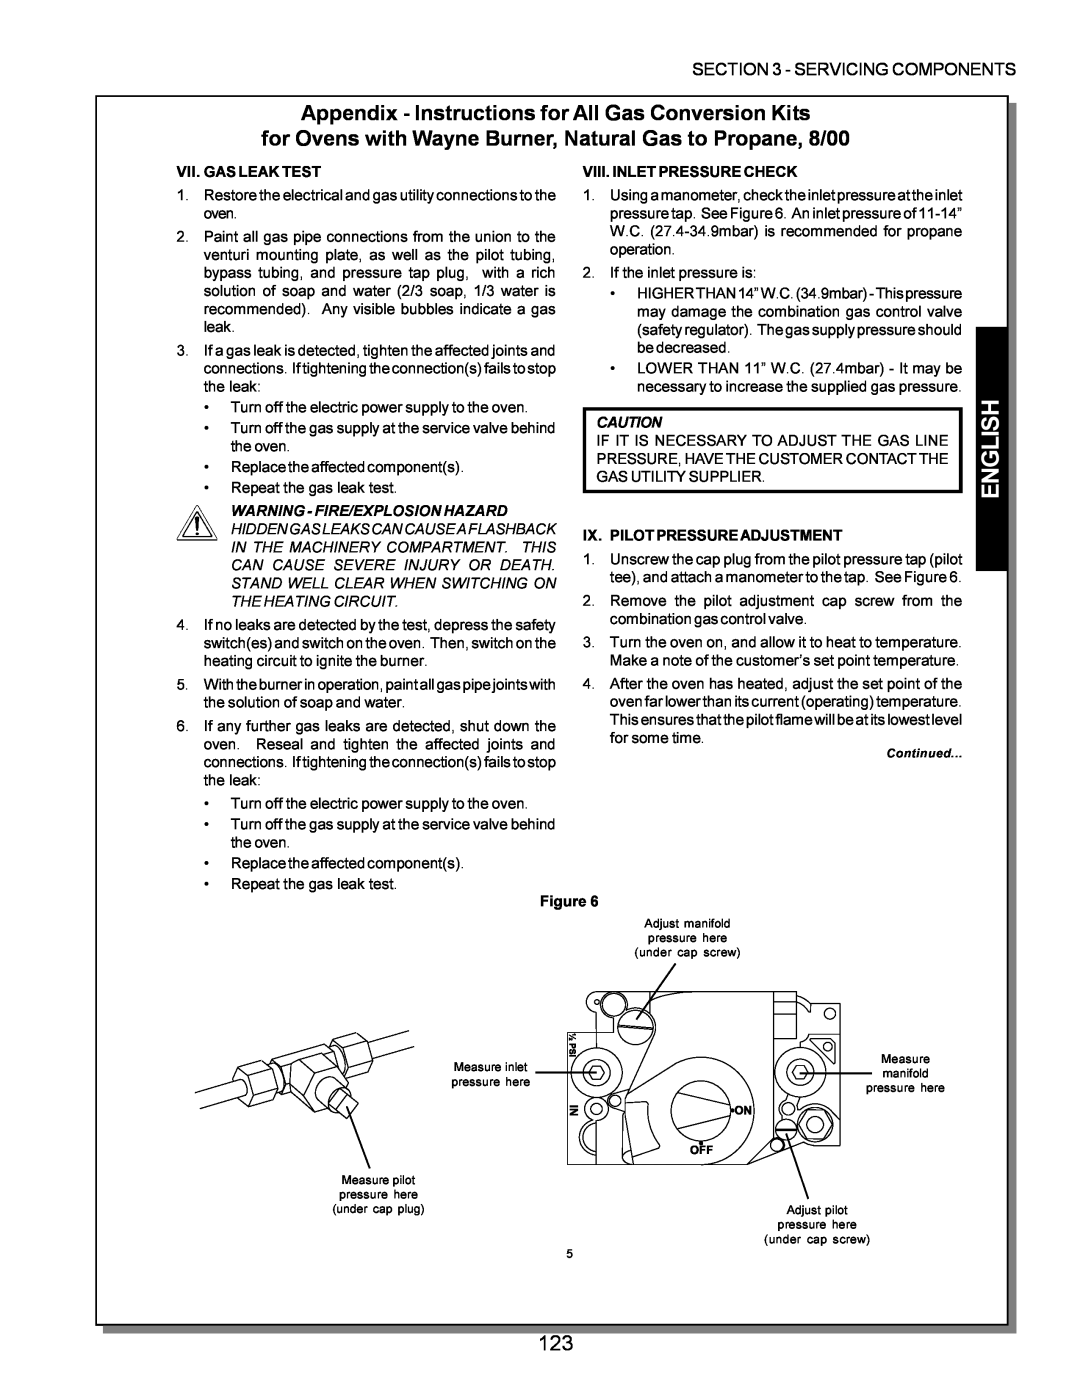 Middleby Marshall PS220, PS570, PS360 manual English, Appendix - Instructions for All Gas Conversion Kits, Vii. Gas Leak Test 